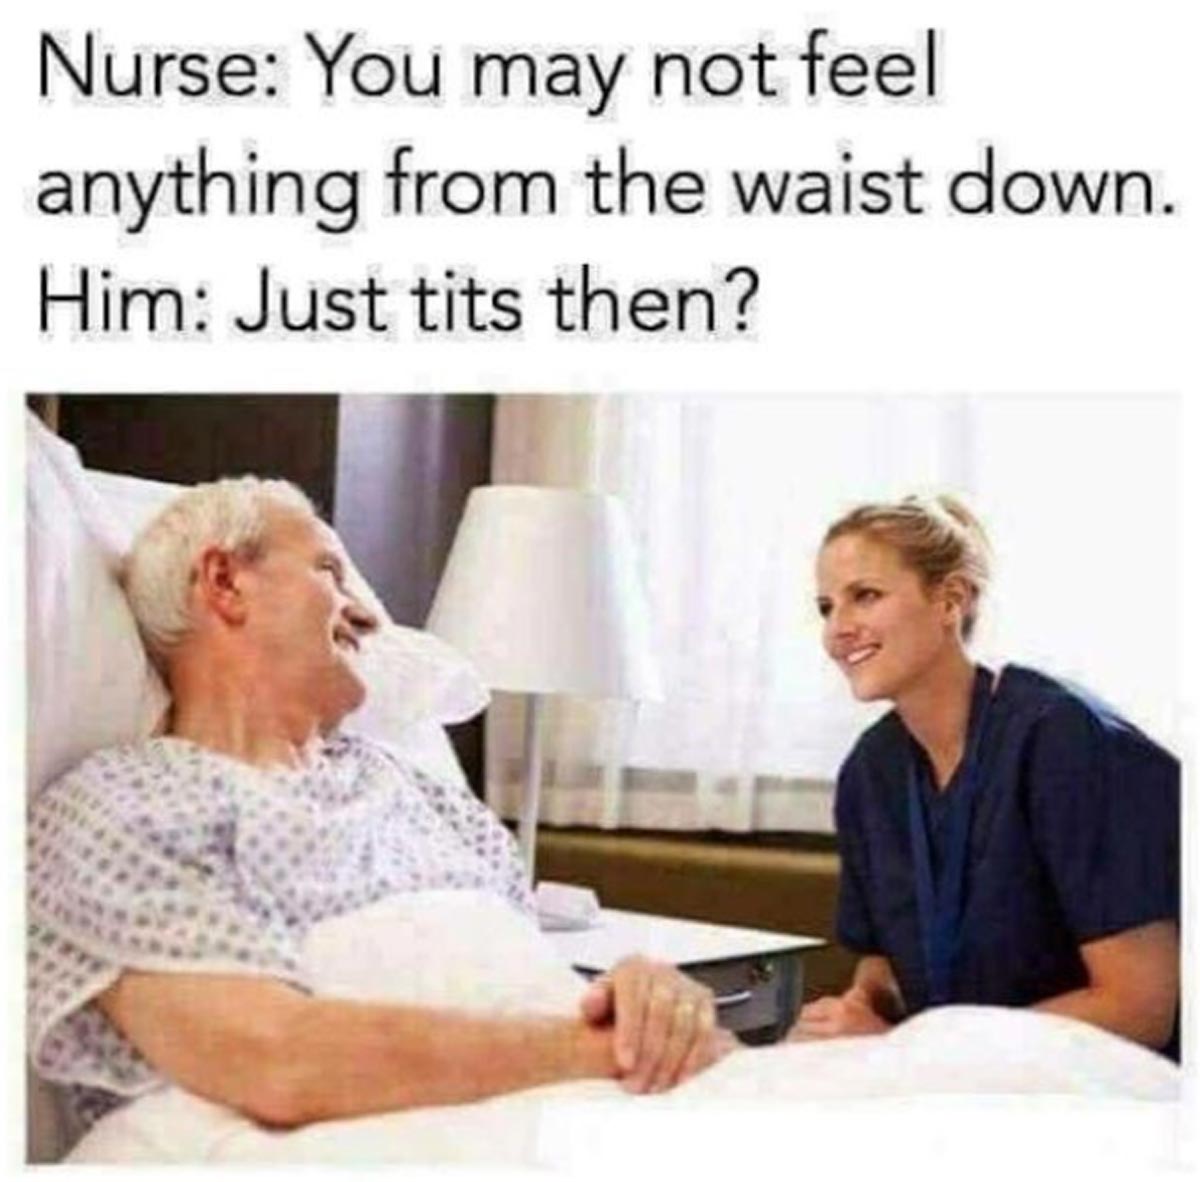 funny sex meme - you may not feel anything from the waist down - Nurse You may not feel anything from the waist down. Him Just tits then?